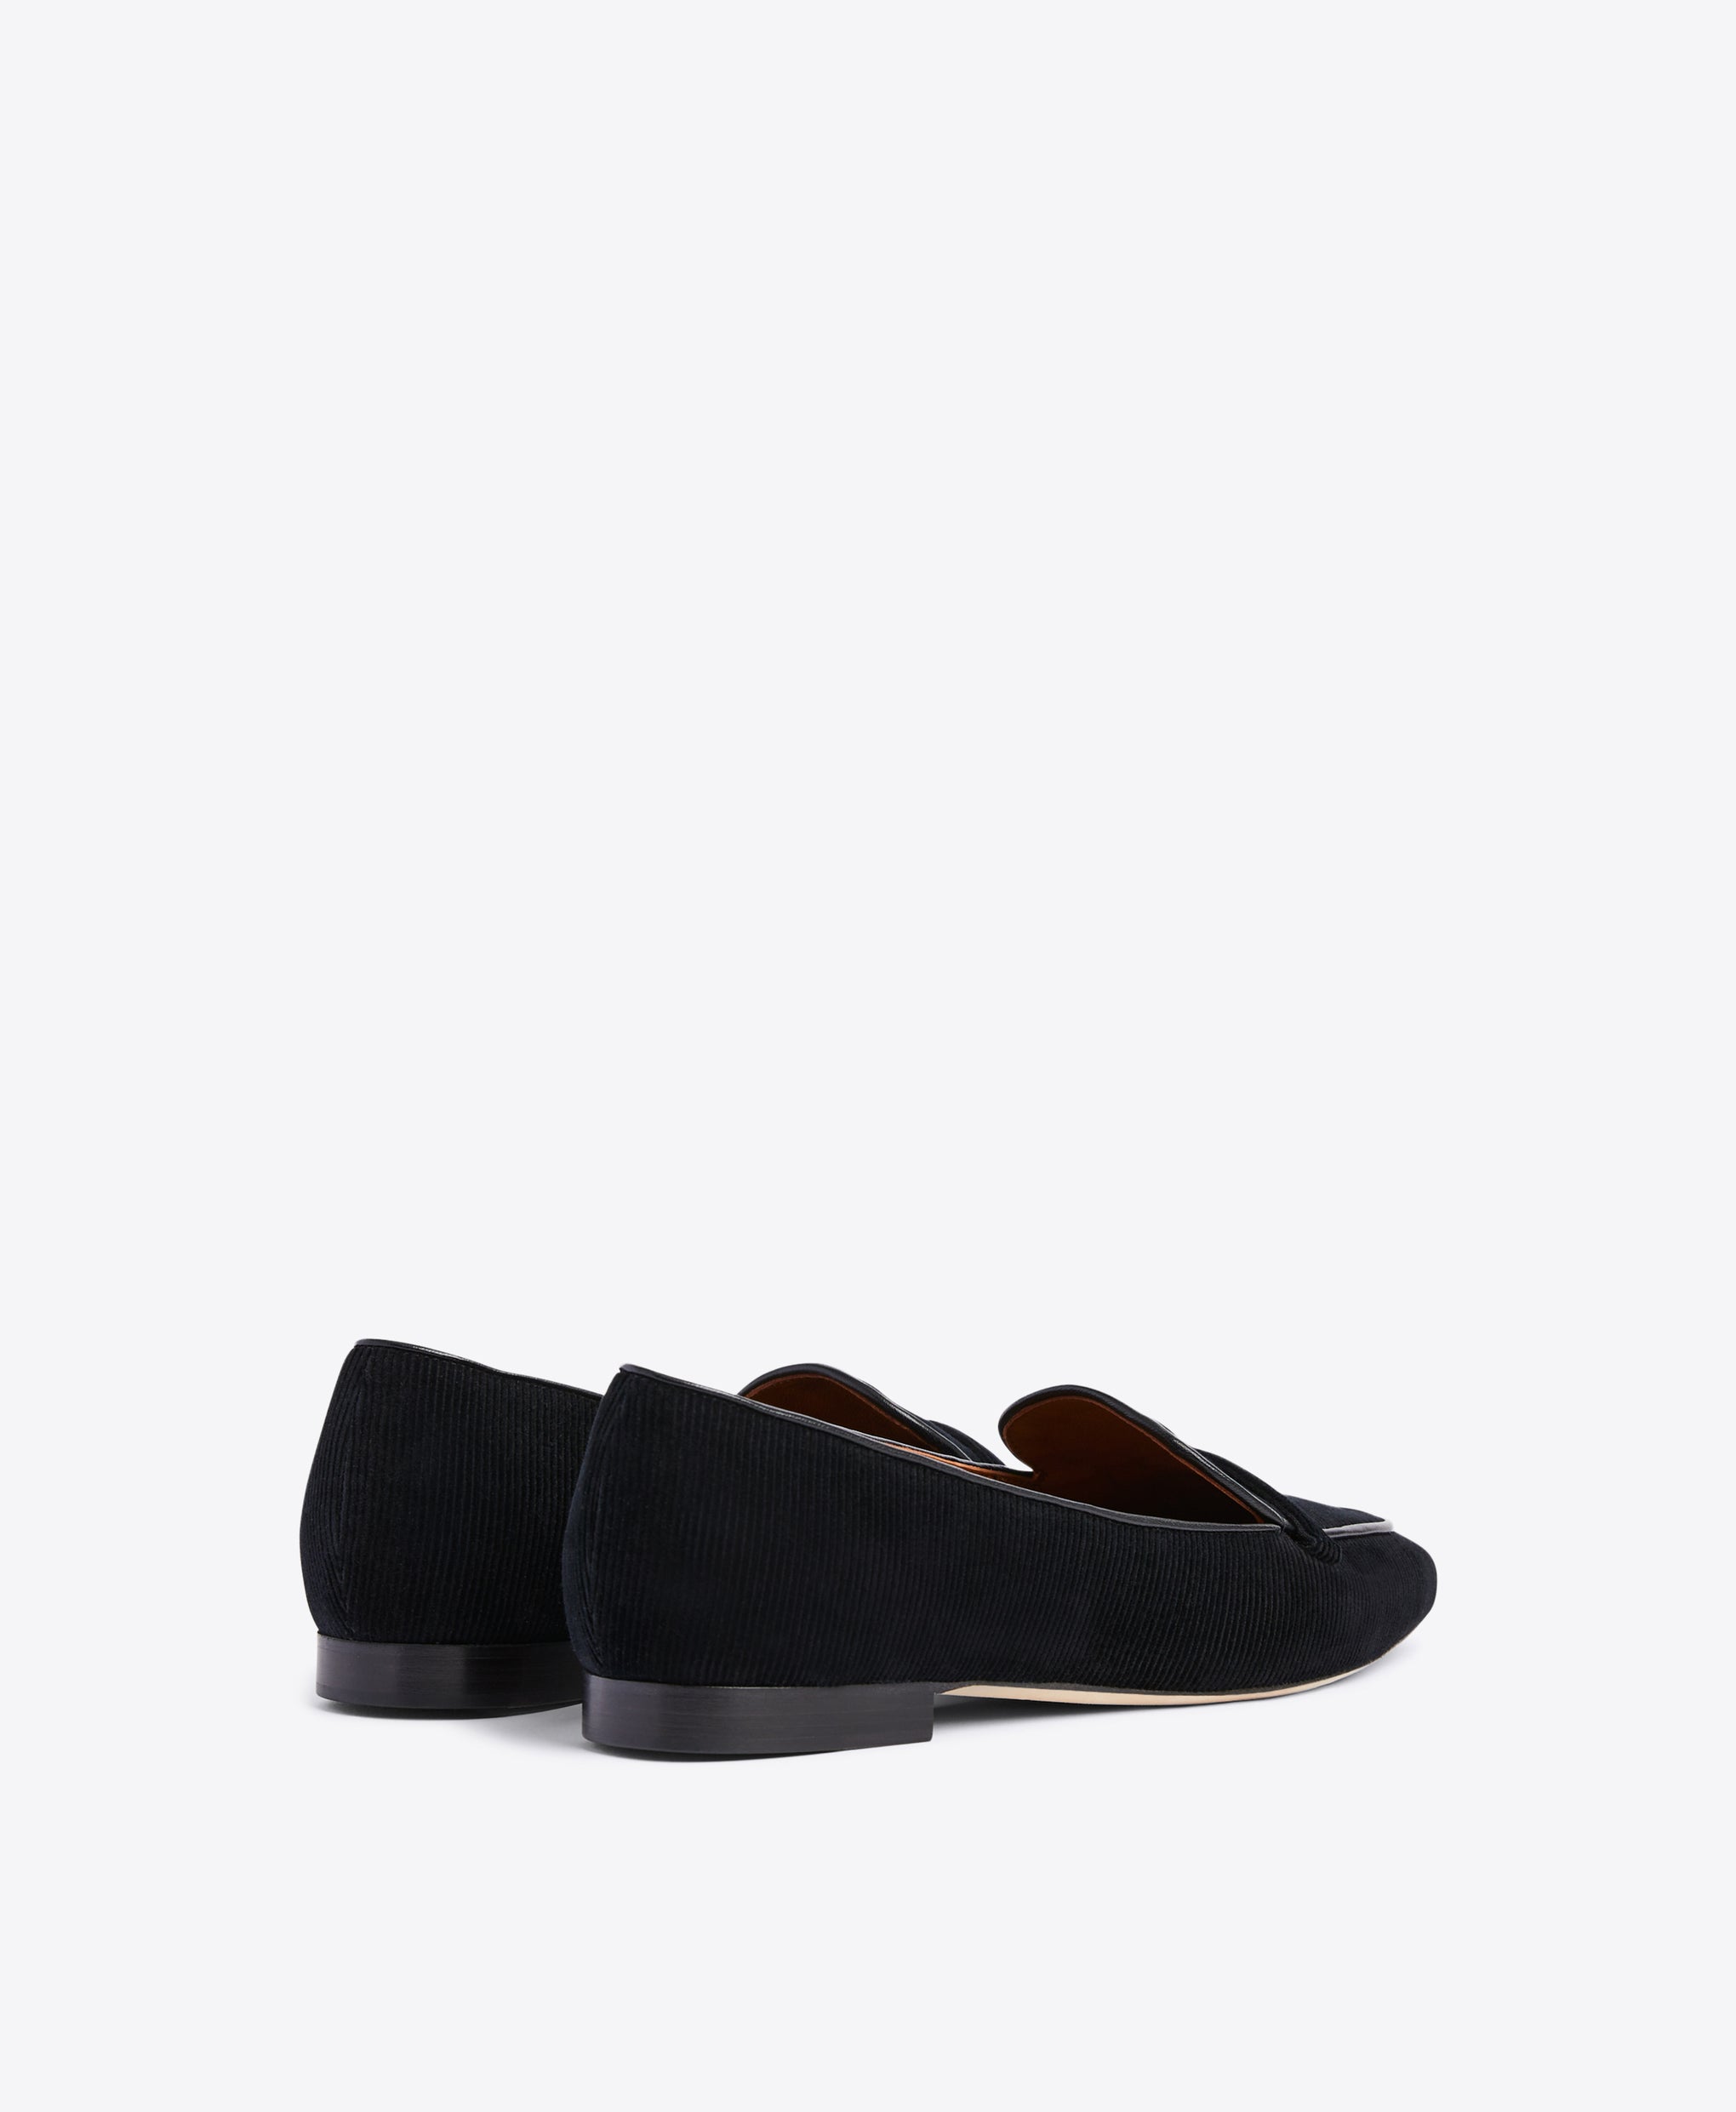 Black Velvet Corduroy Loafers - Elongated Almond Toe with Strap Detail on Monoblock | Malone Souliers